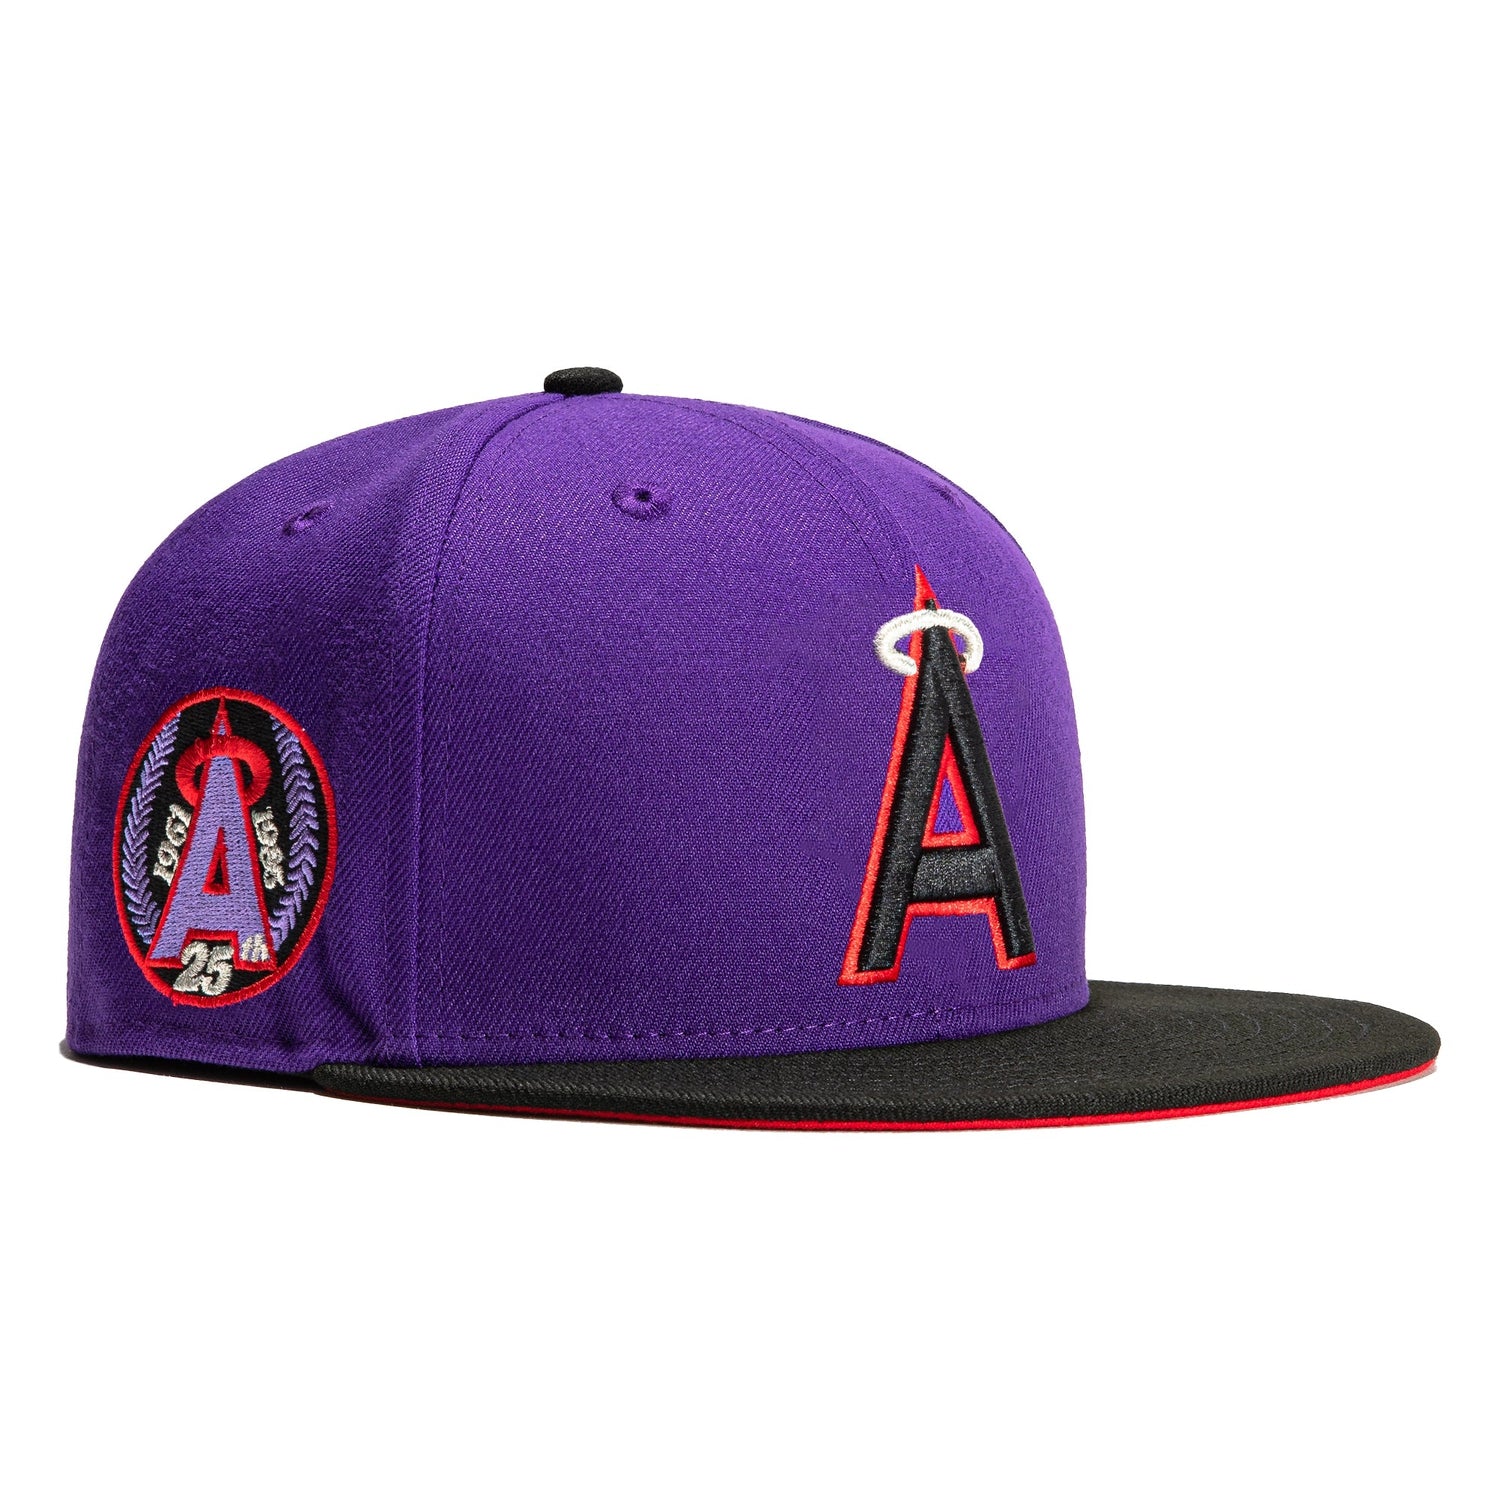 LAKERS X Angels Red Fitted – Creativ LA